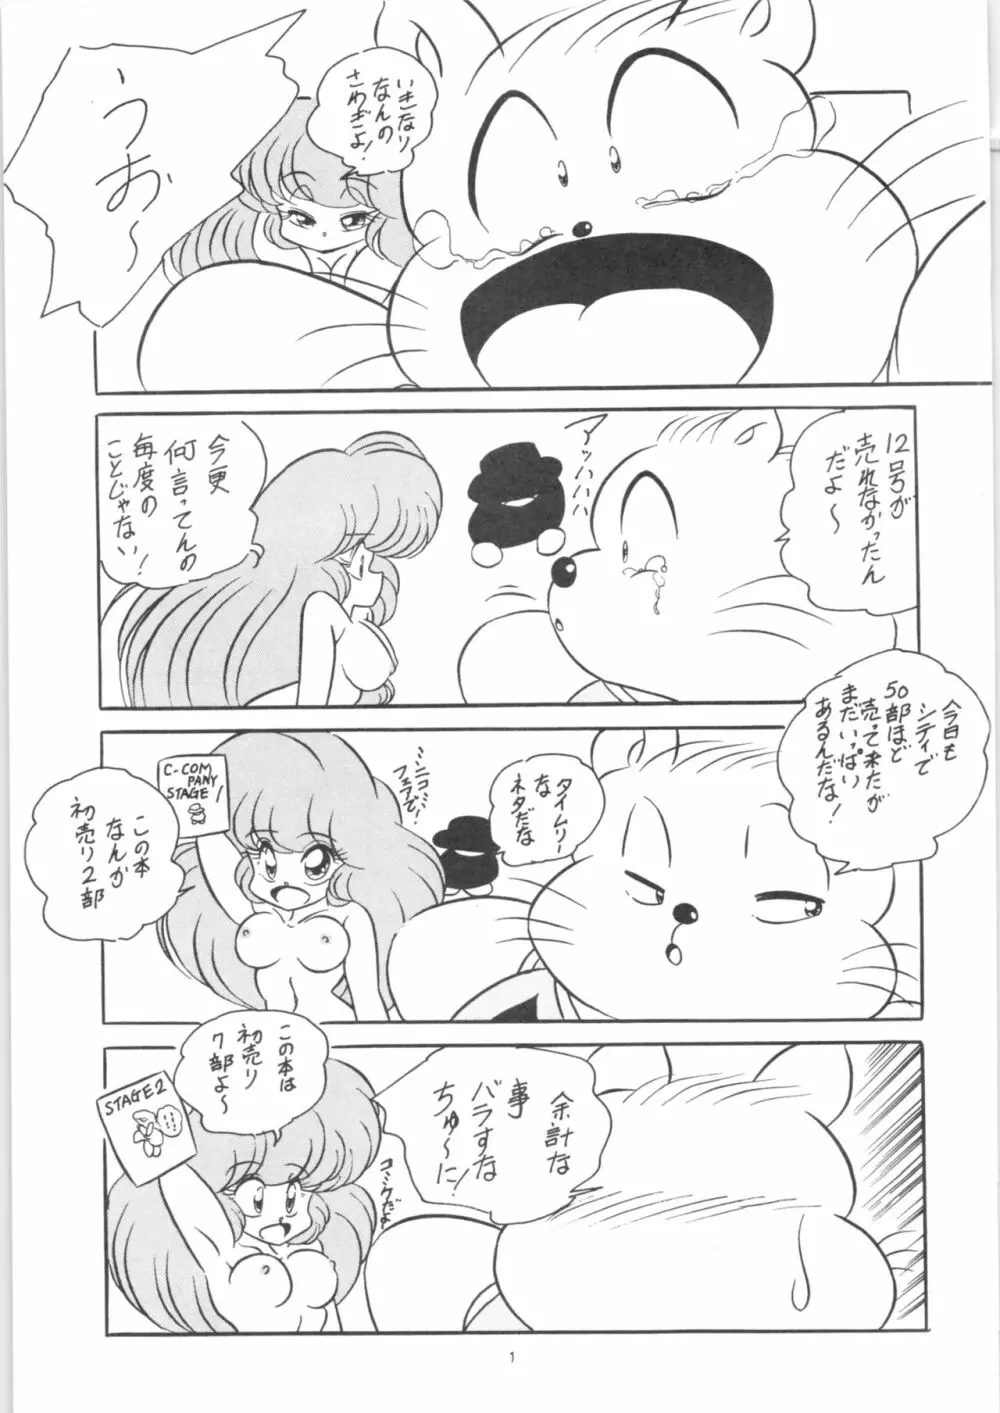 C-COMPANY SPECIAL STAGE 13 Page.2